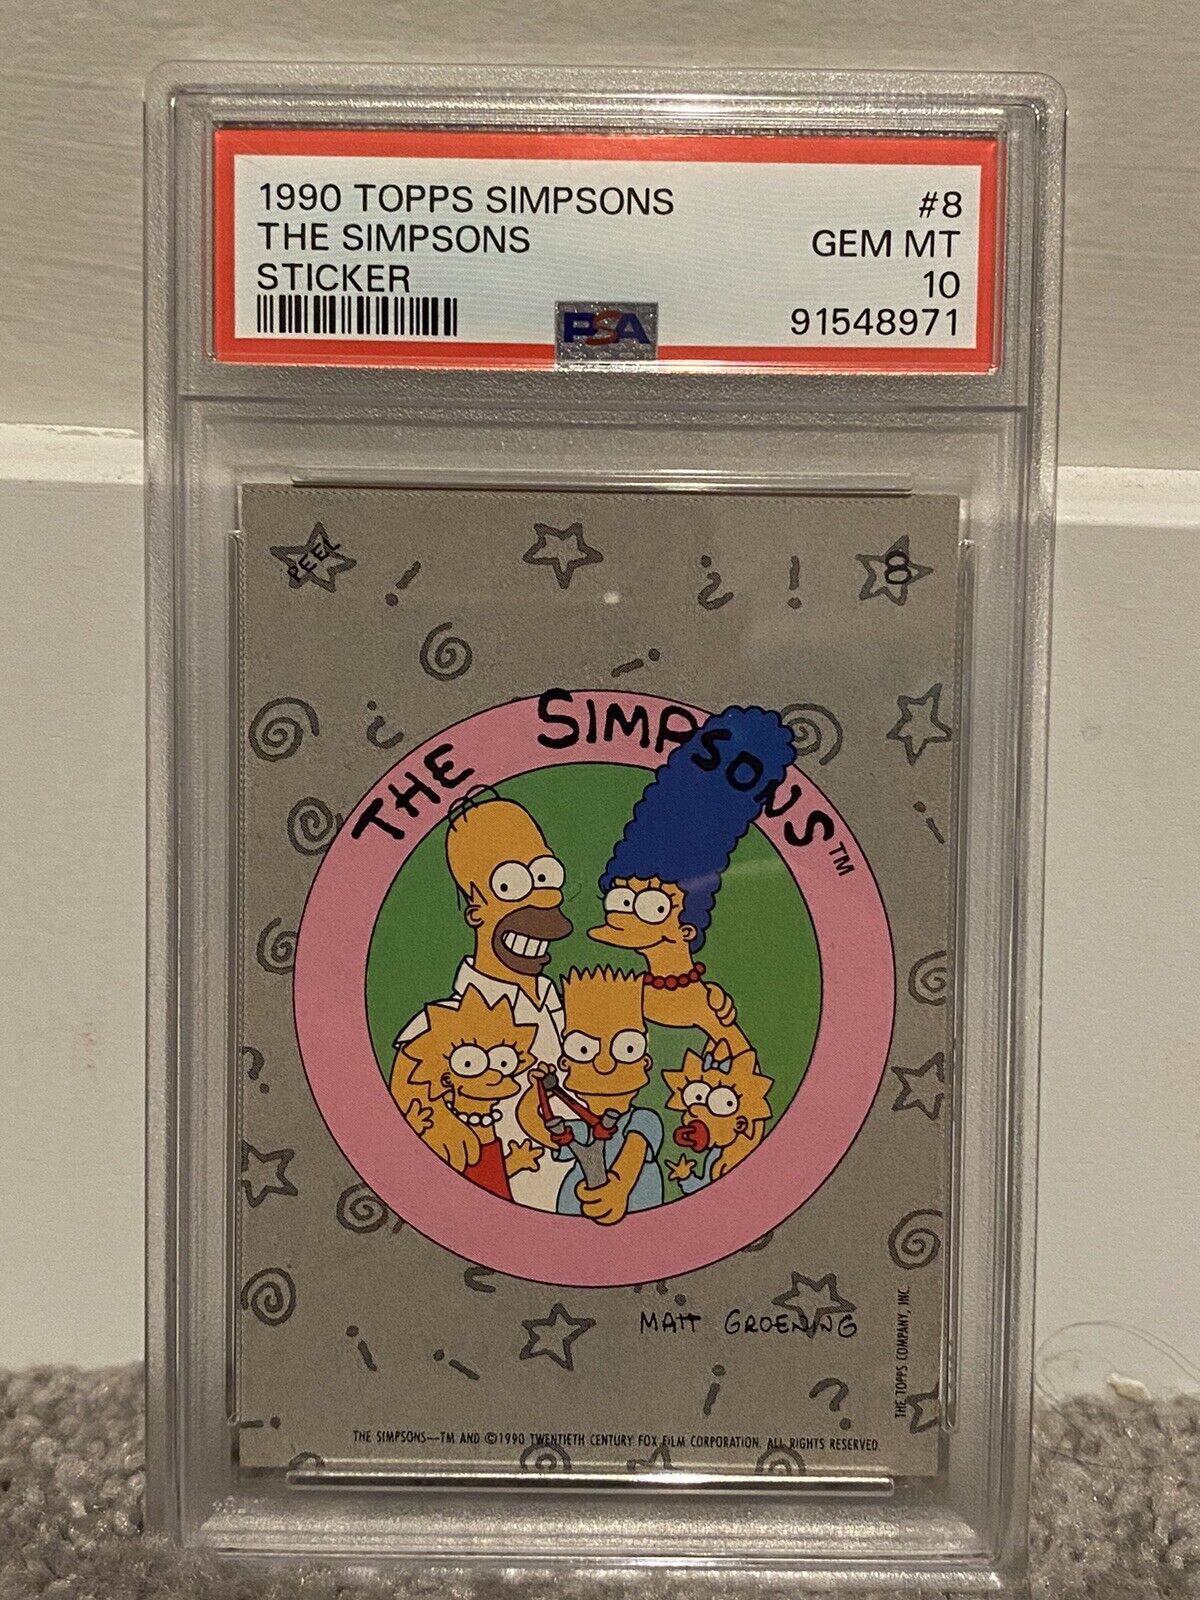 The Simpsons - 1990 Topps Simpsons Stickers #8 - PSA 10